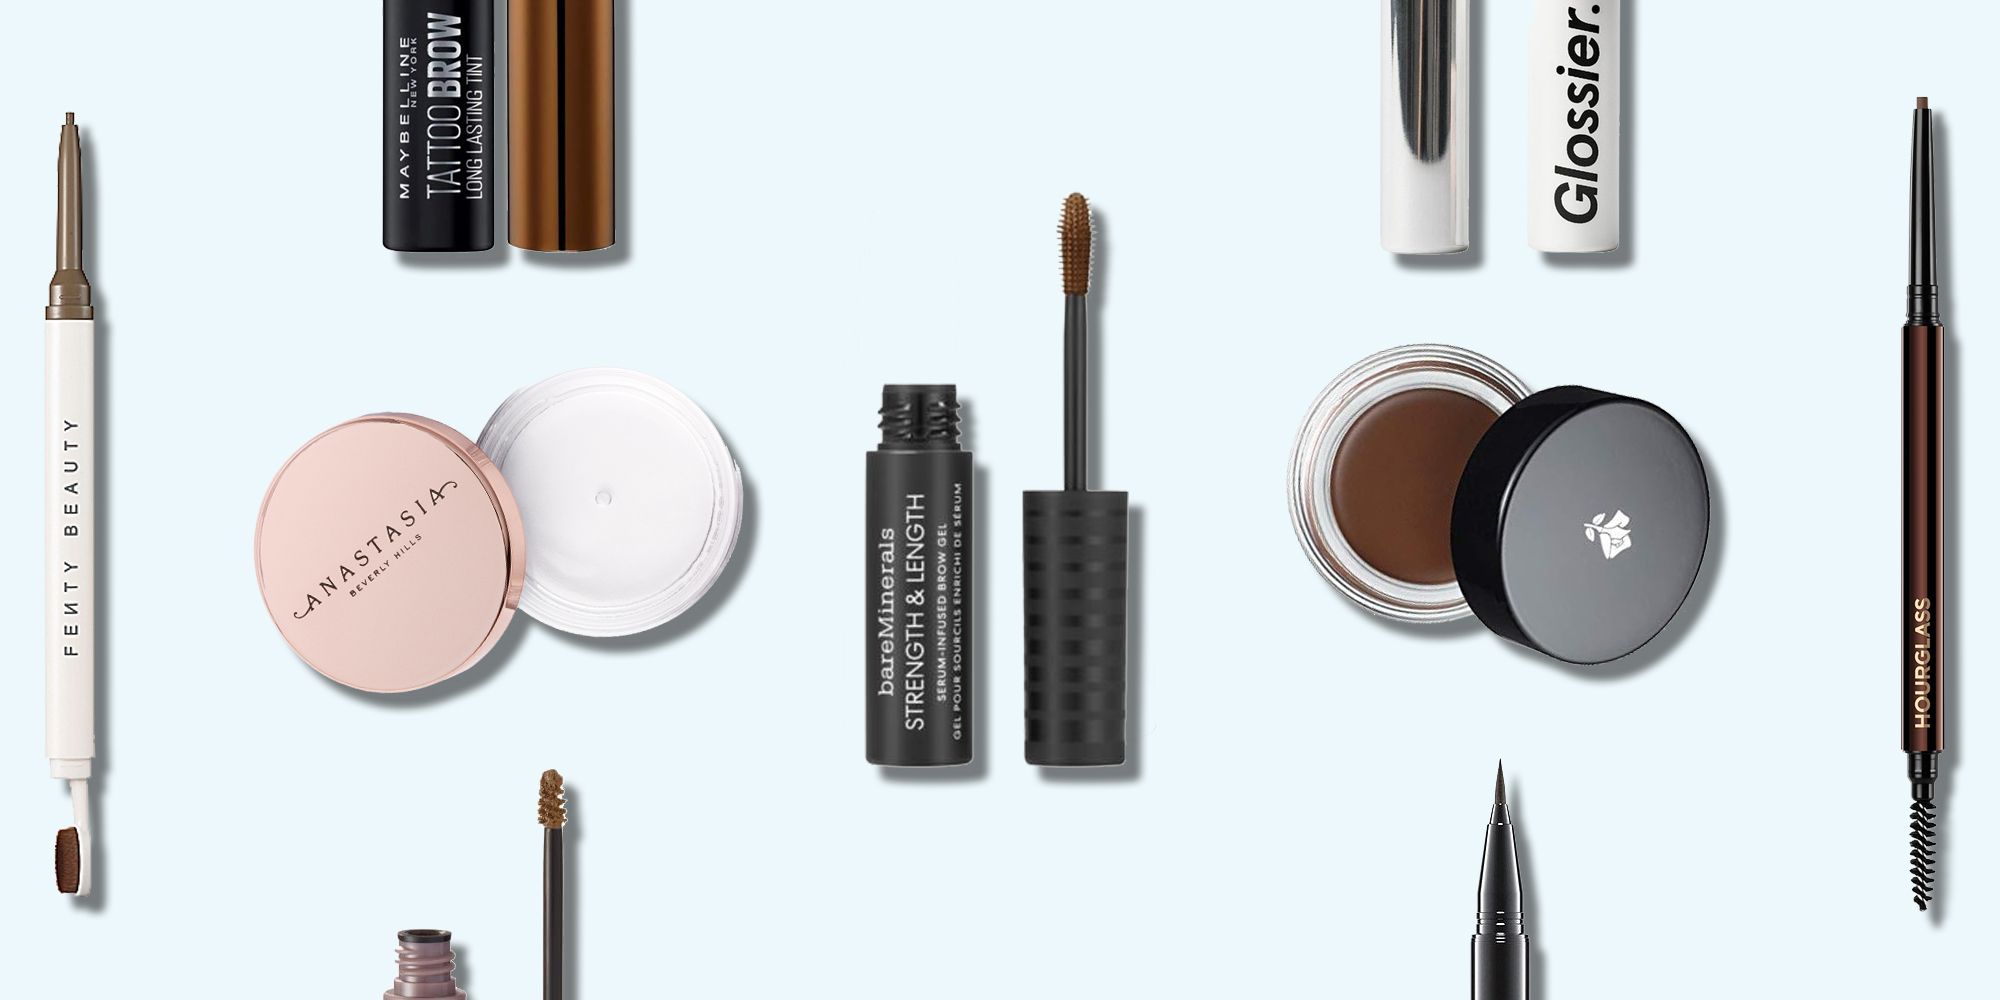 Best Eyebrow Pencils, Powders and Gels - 14 Amazing Eyebrow Products